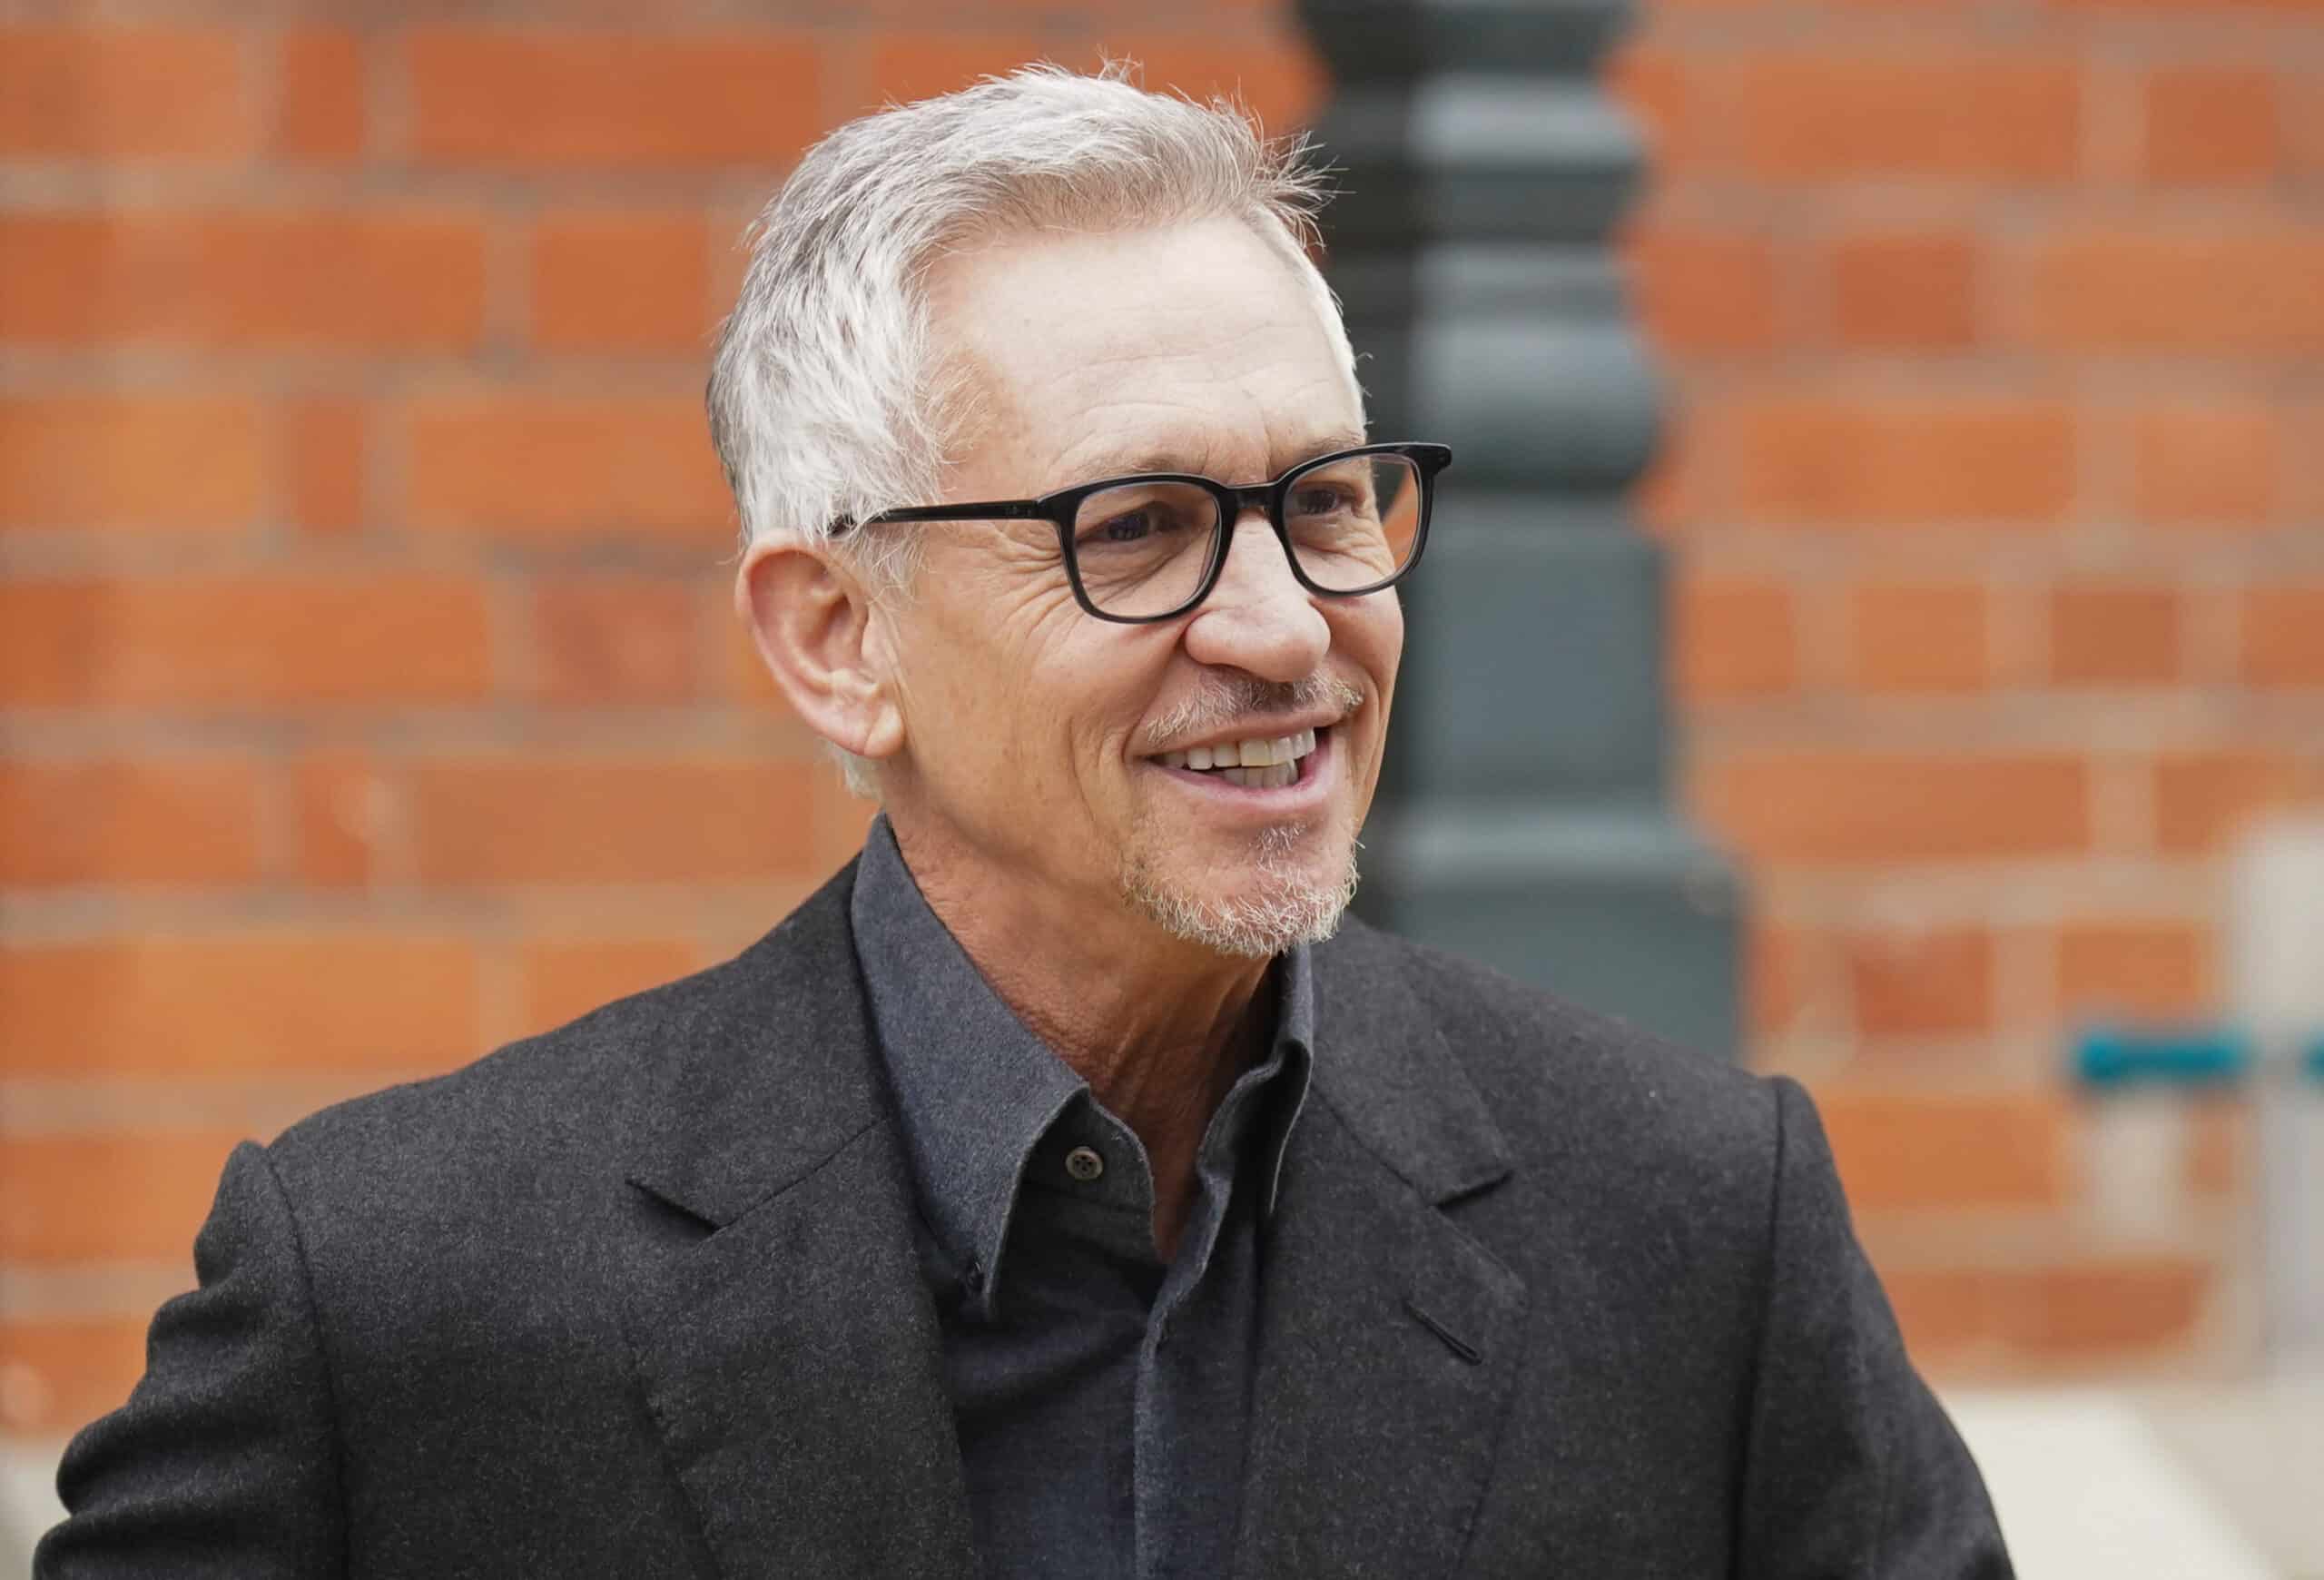 Gary Lineker will not ‘back down on his word’, according to his son